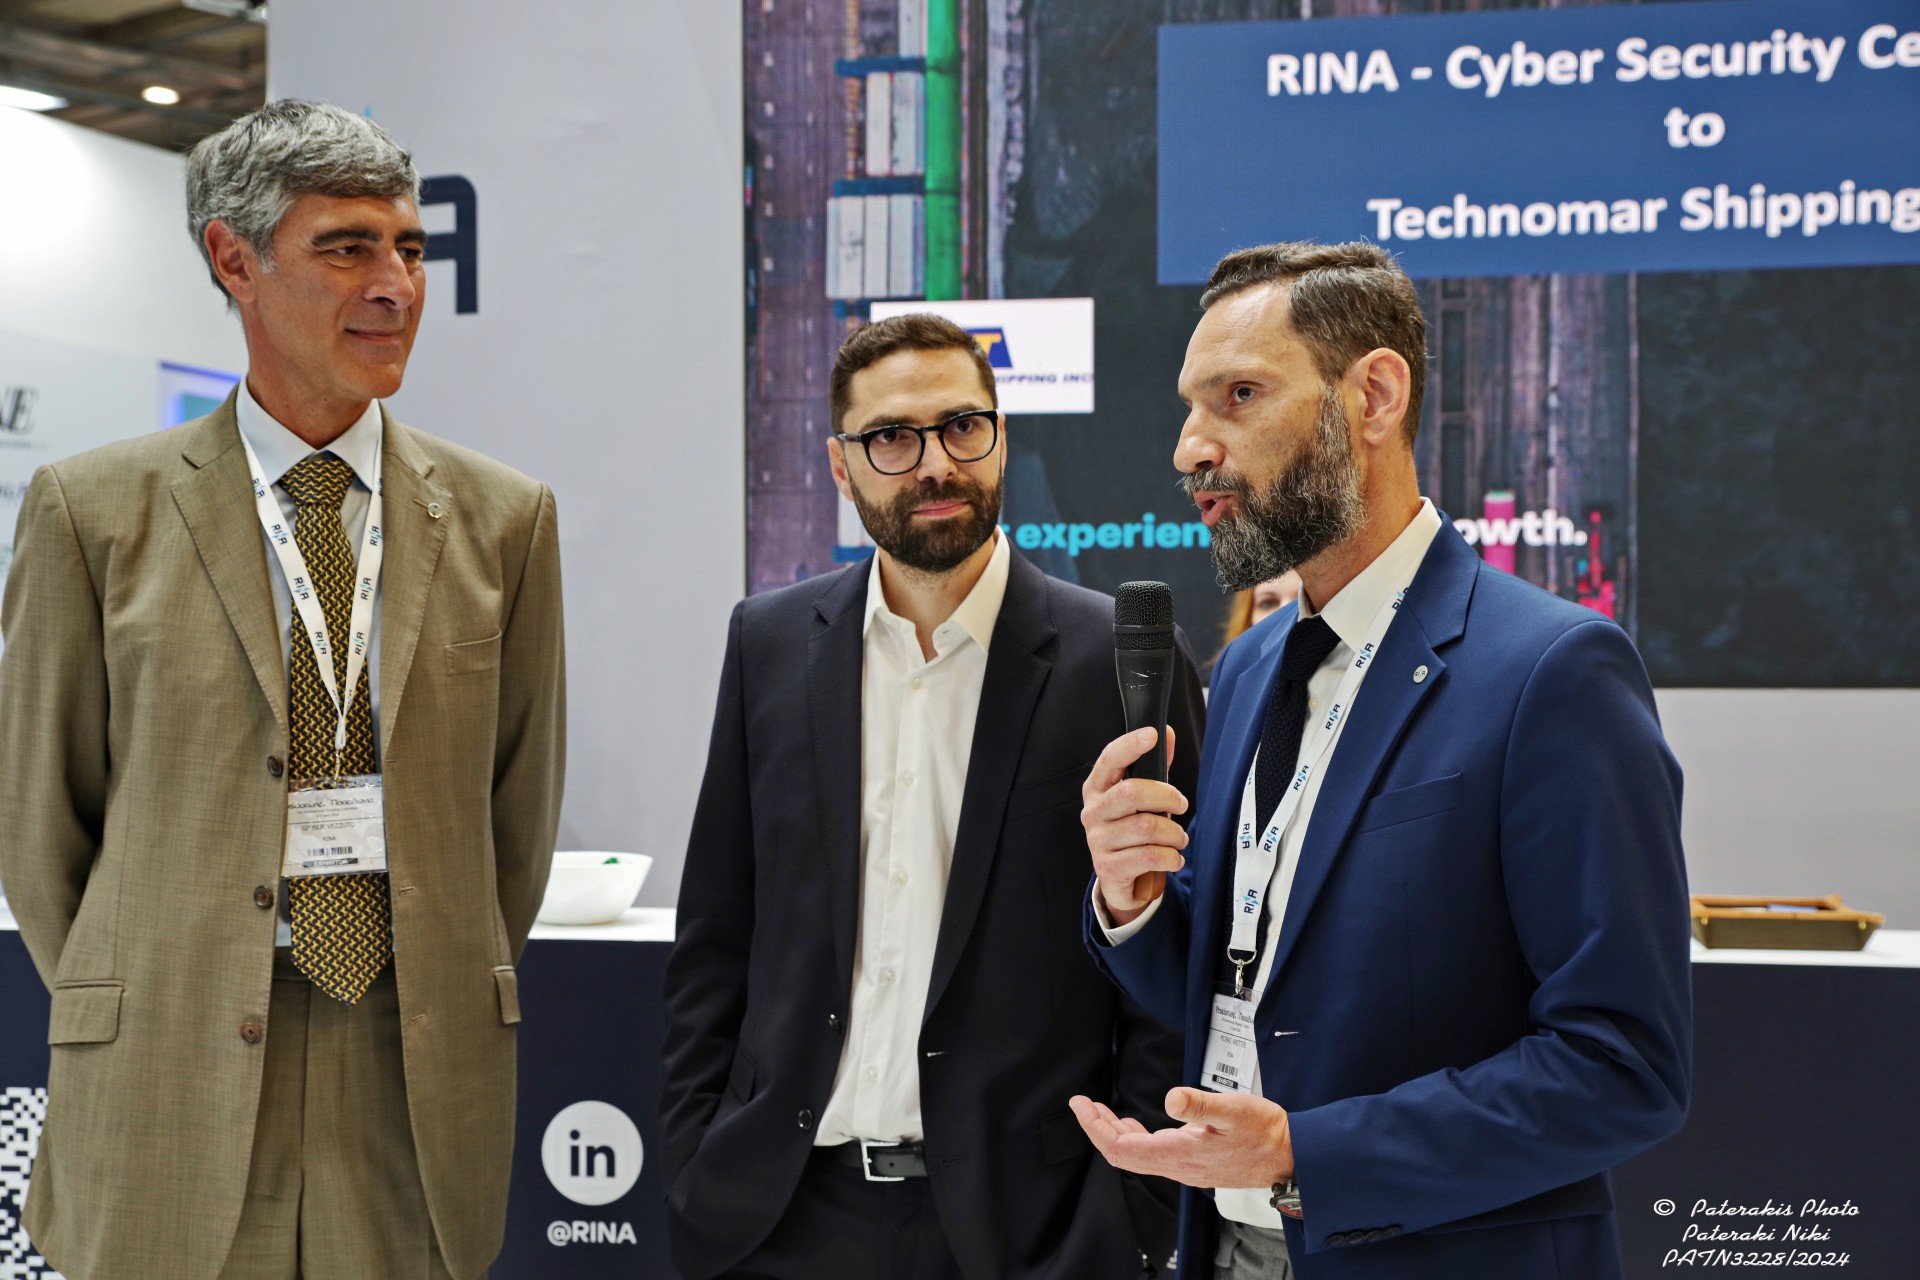 Technomar Shipping Inc. Receives RINA Cyber Security Certificate